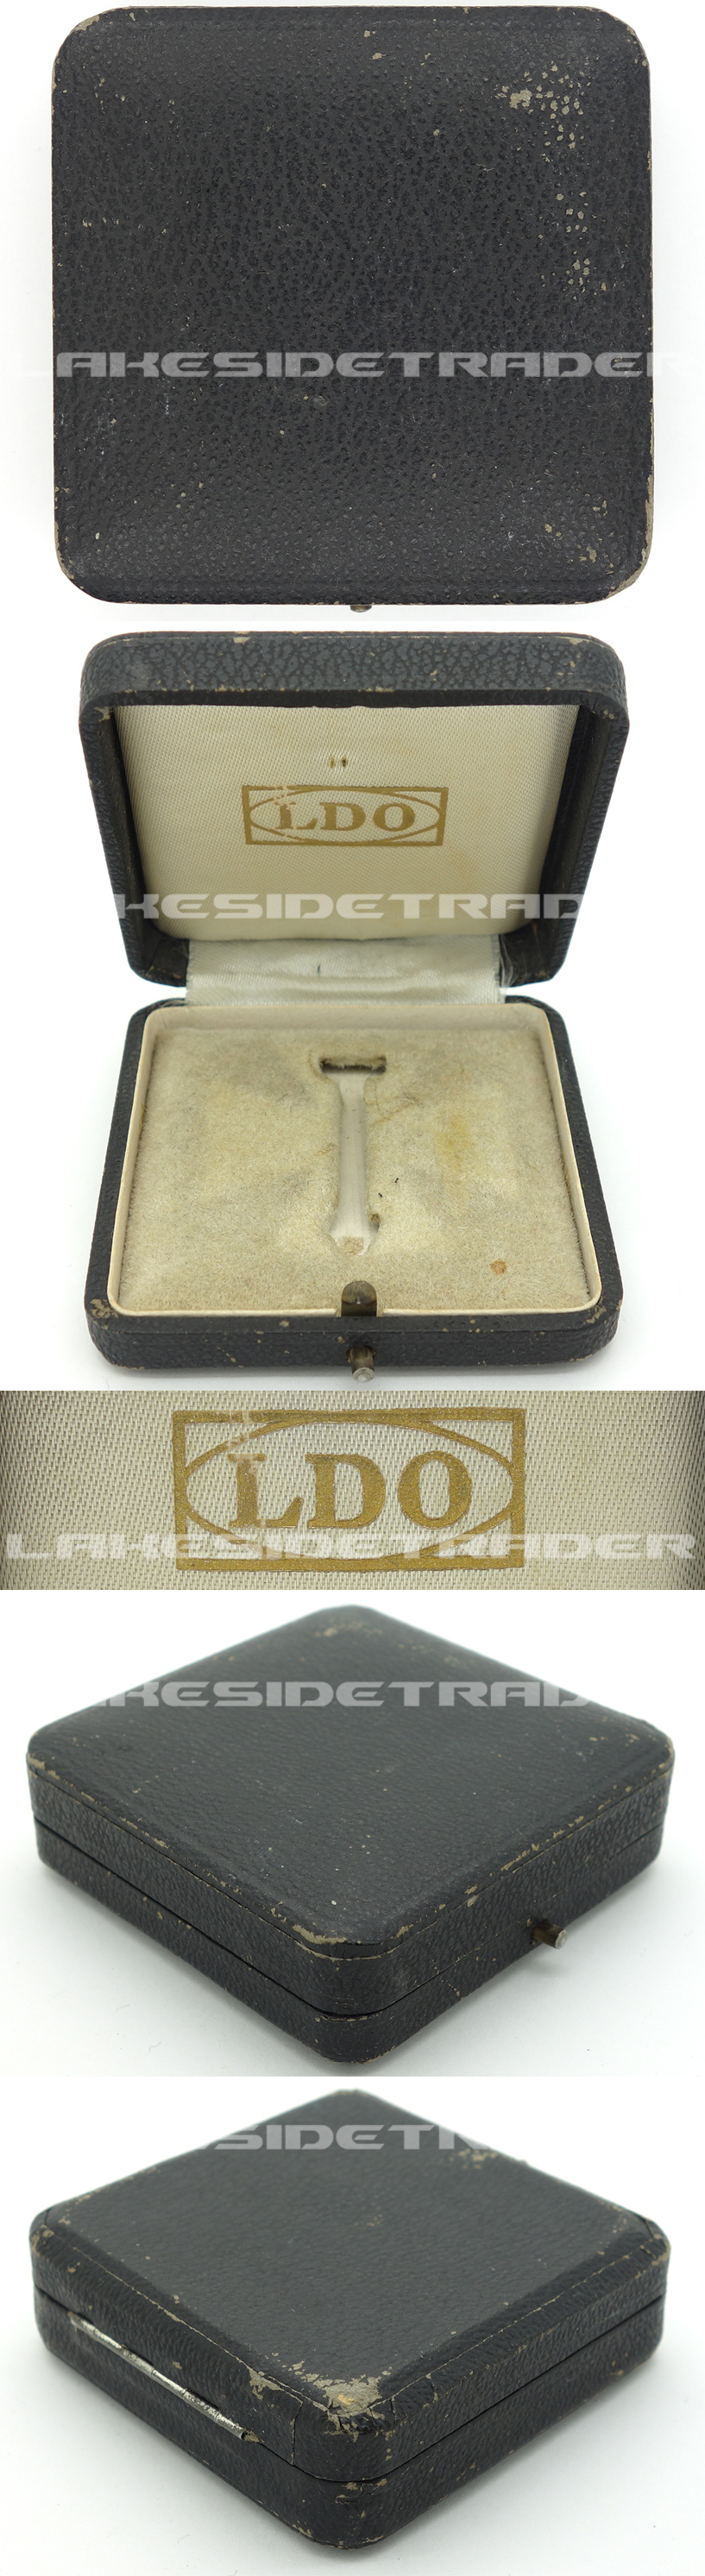 LDO Issue Case for a 1st Class Iron Cross